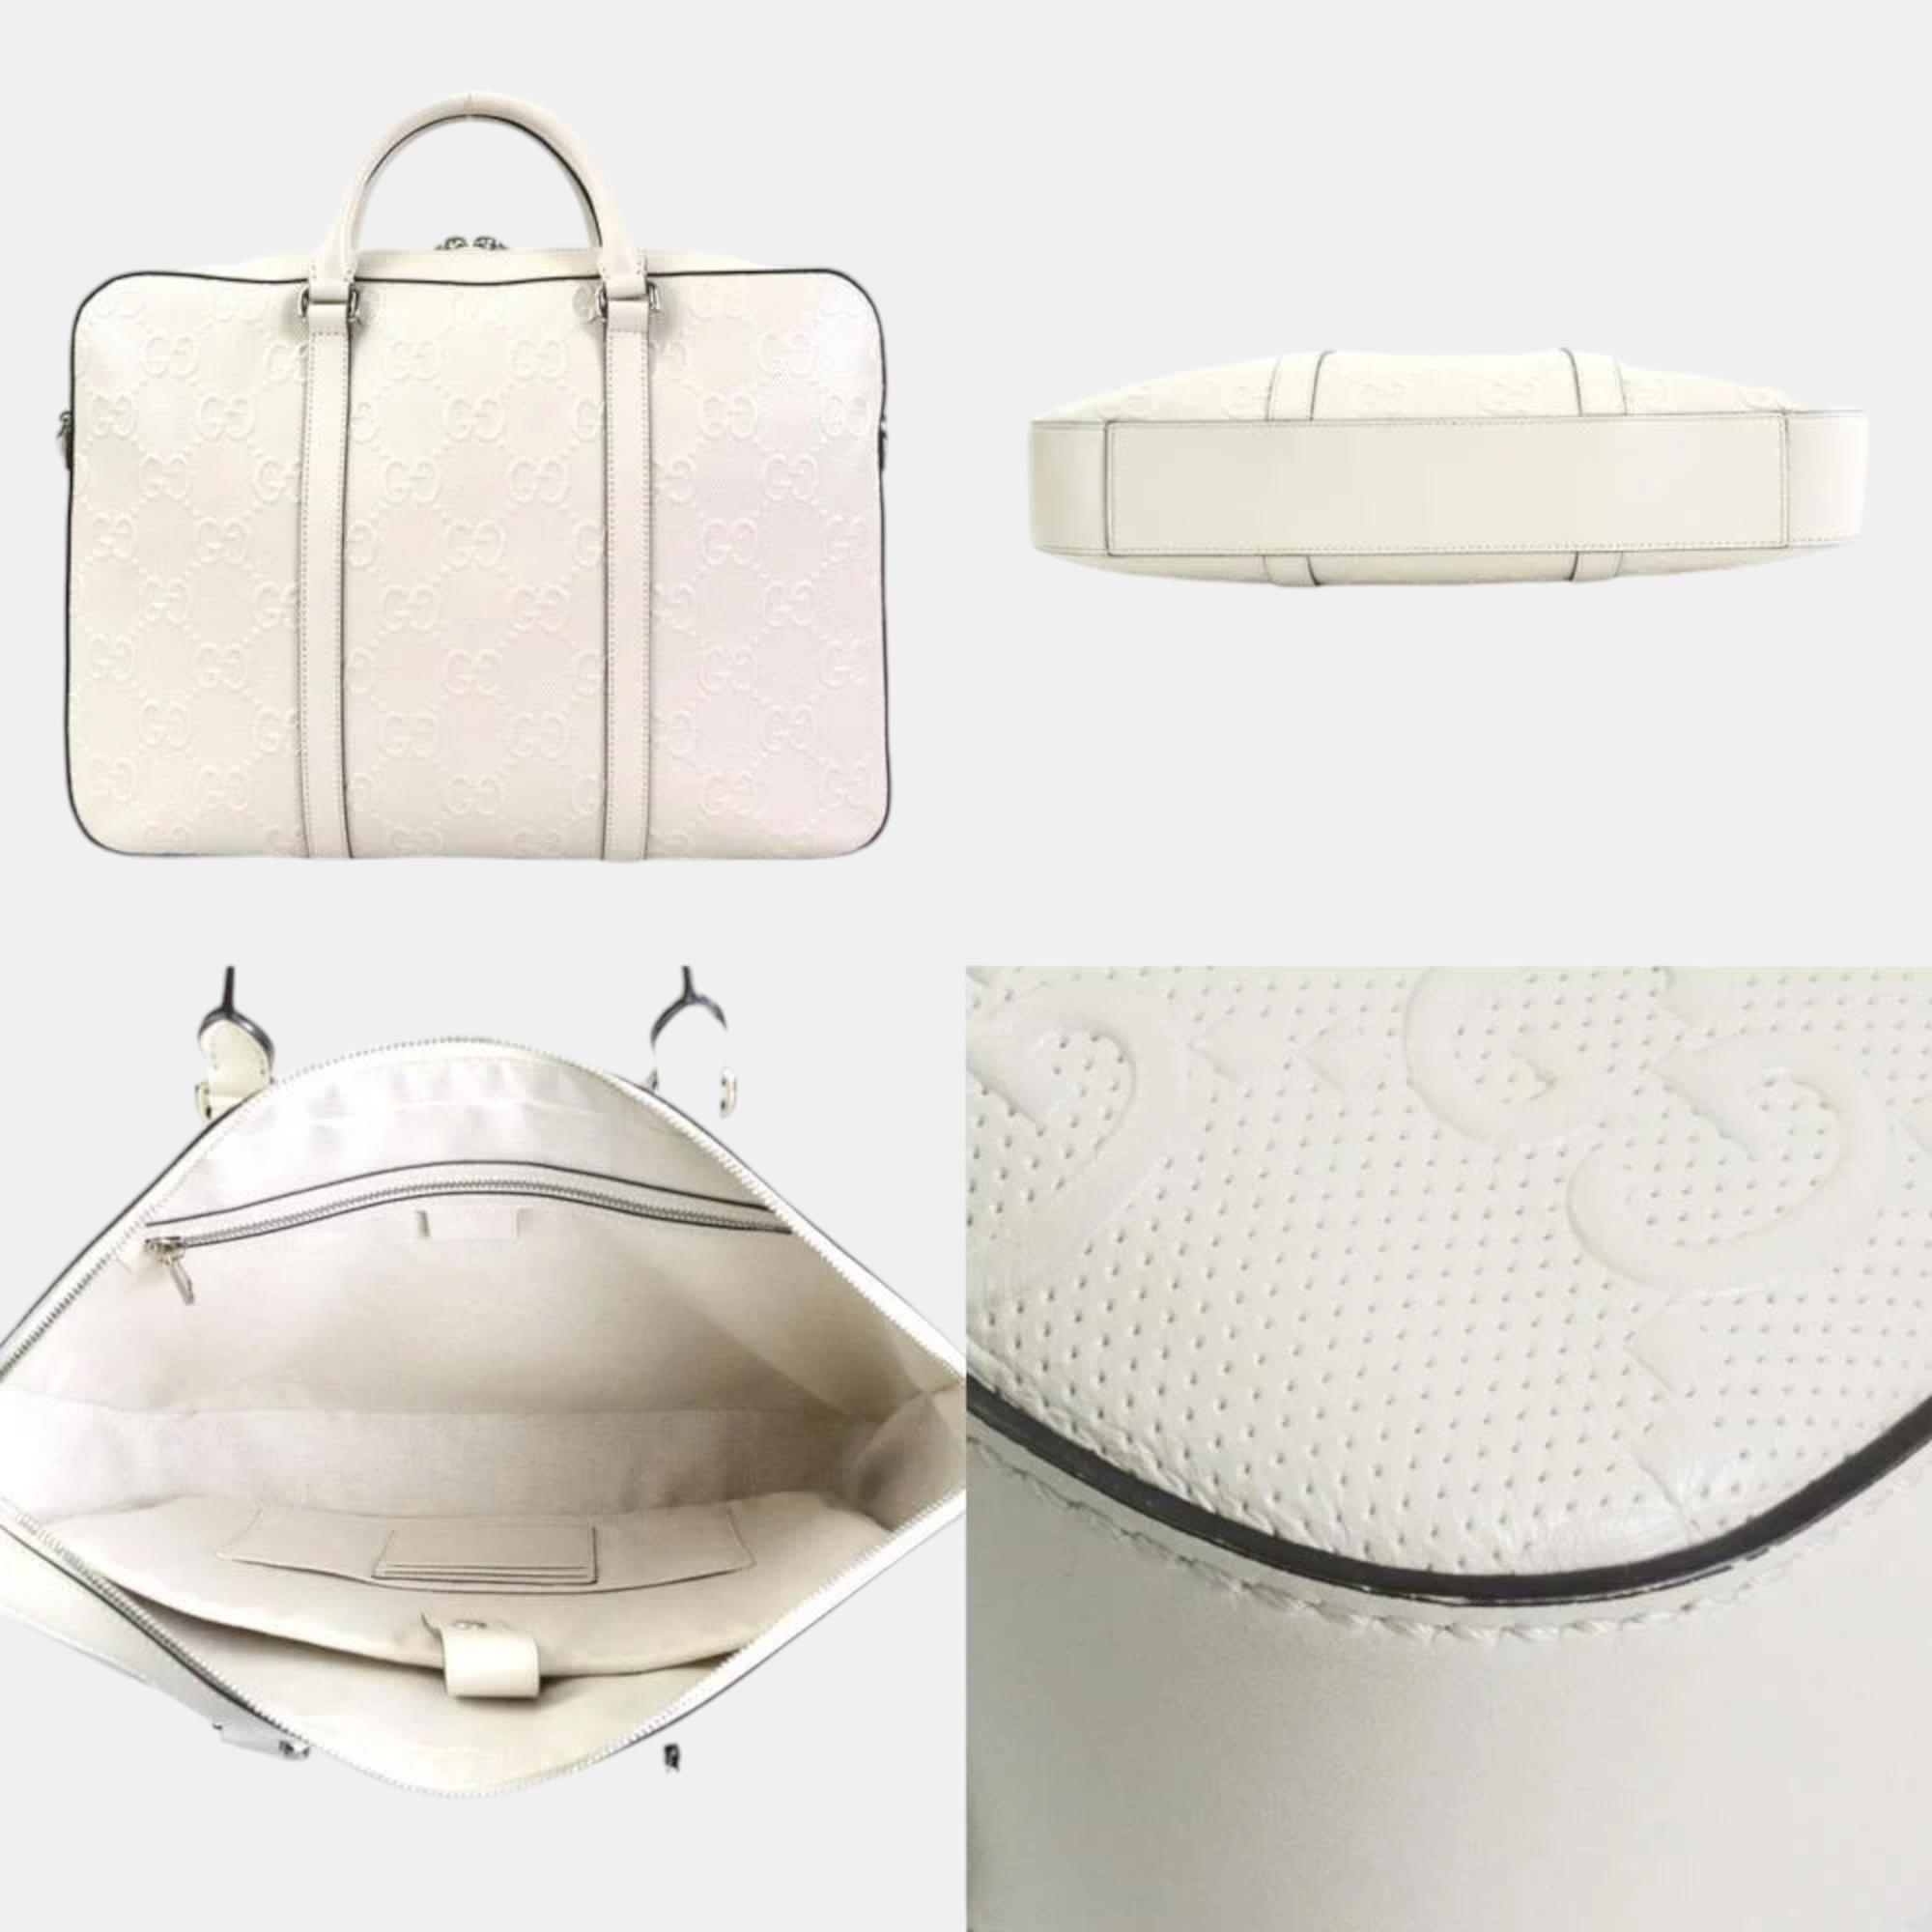 Gucci White GG Embossed Leather Duffle Bag